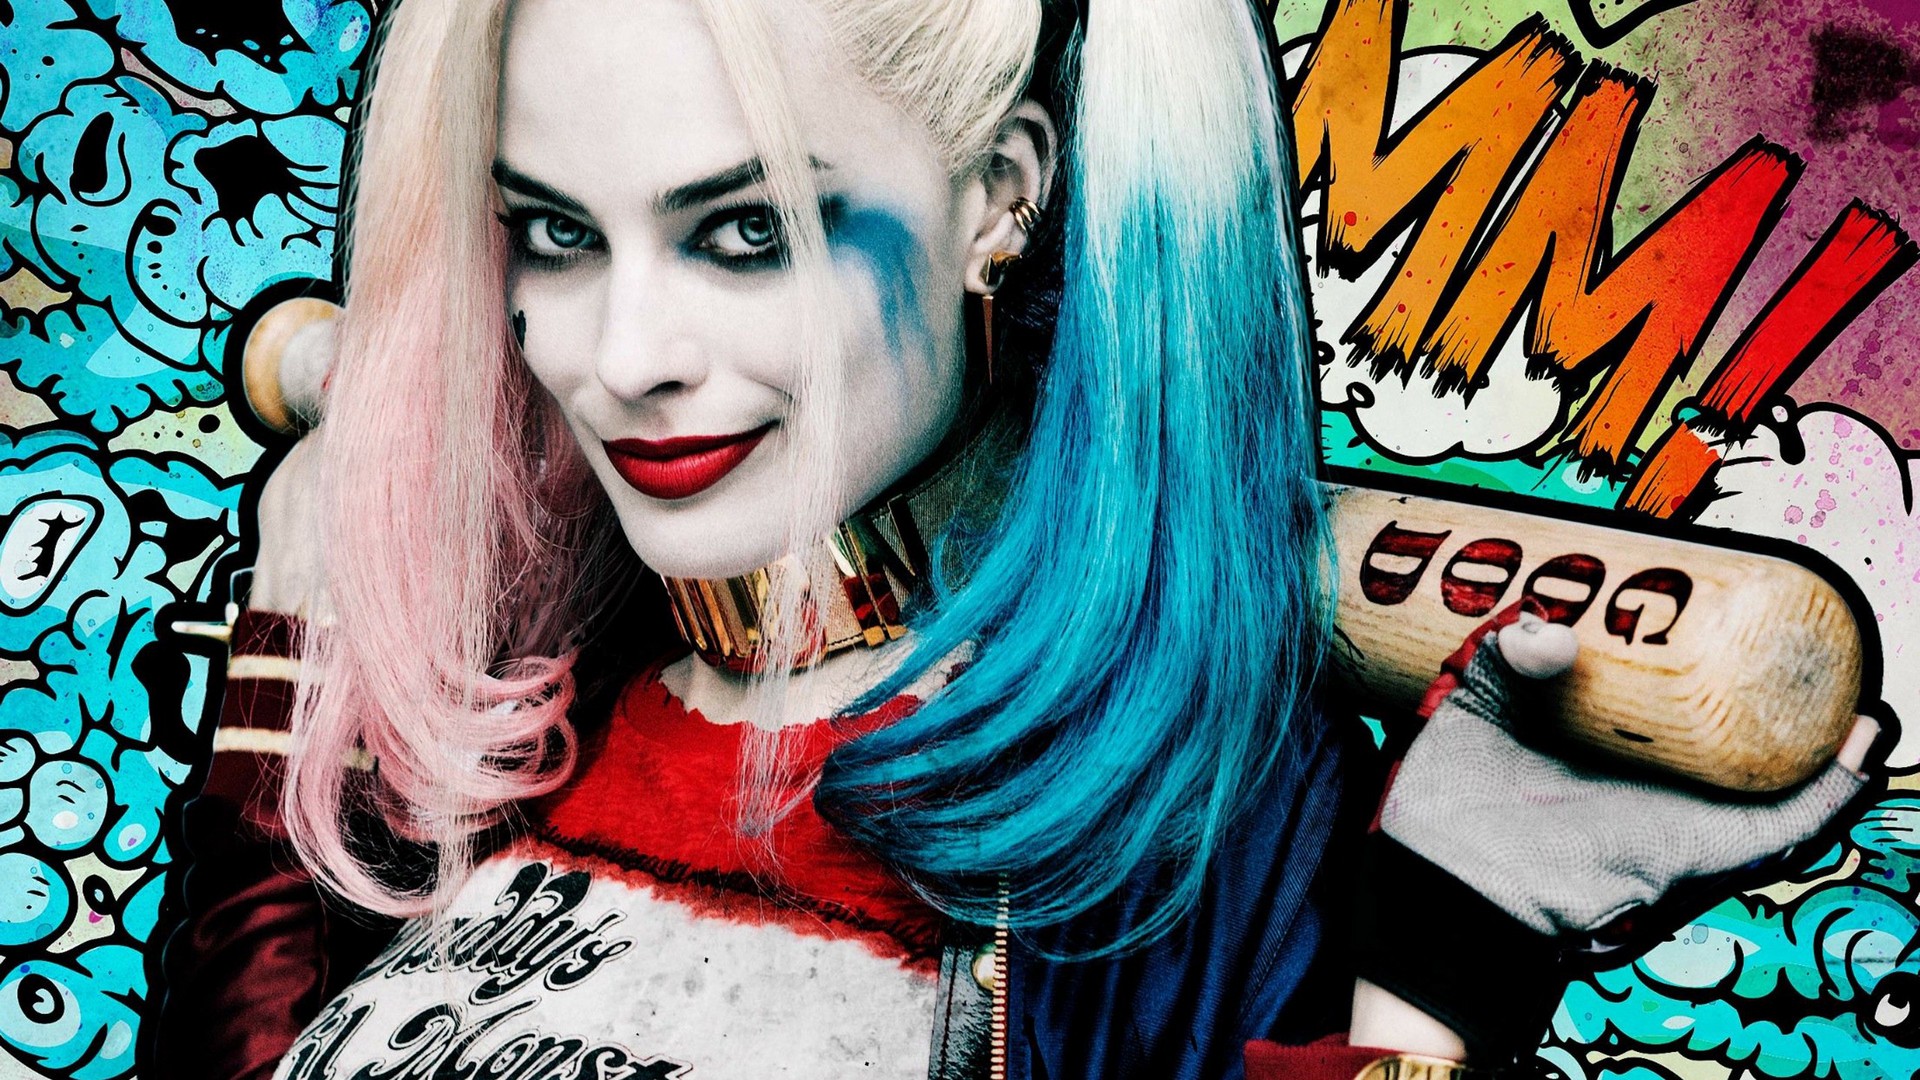 Harley Quinn Pictures Desktop Wallpaper with image resolution 1920x1080 pixel. You can use this wallpaper as background for your desktop Computer Screensavers, Android or iPhone smartphones